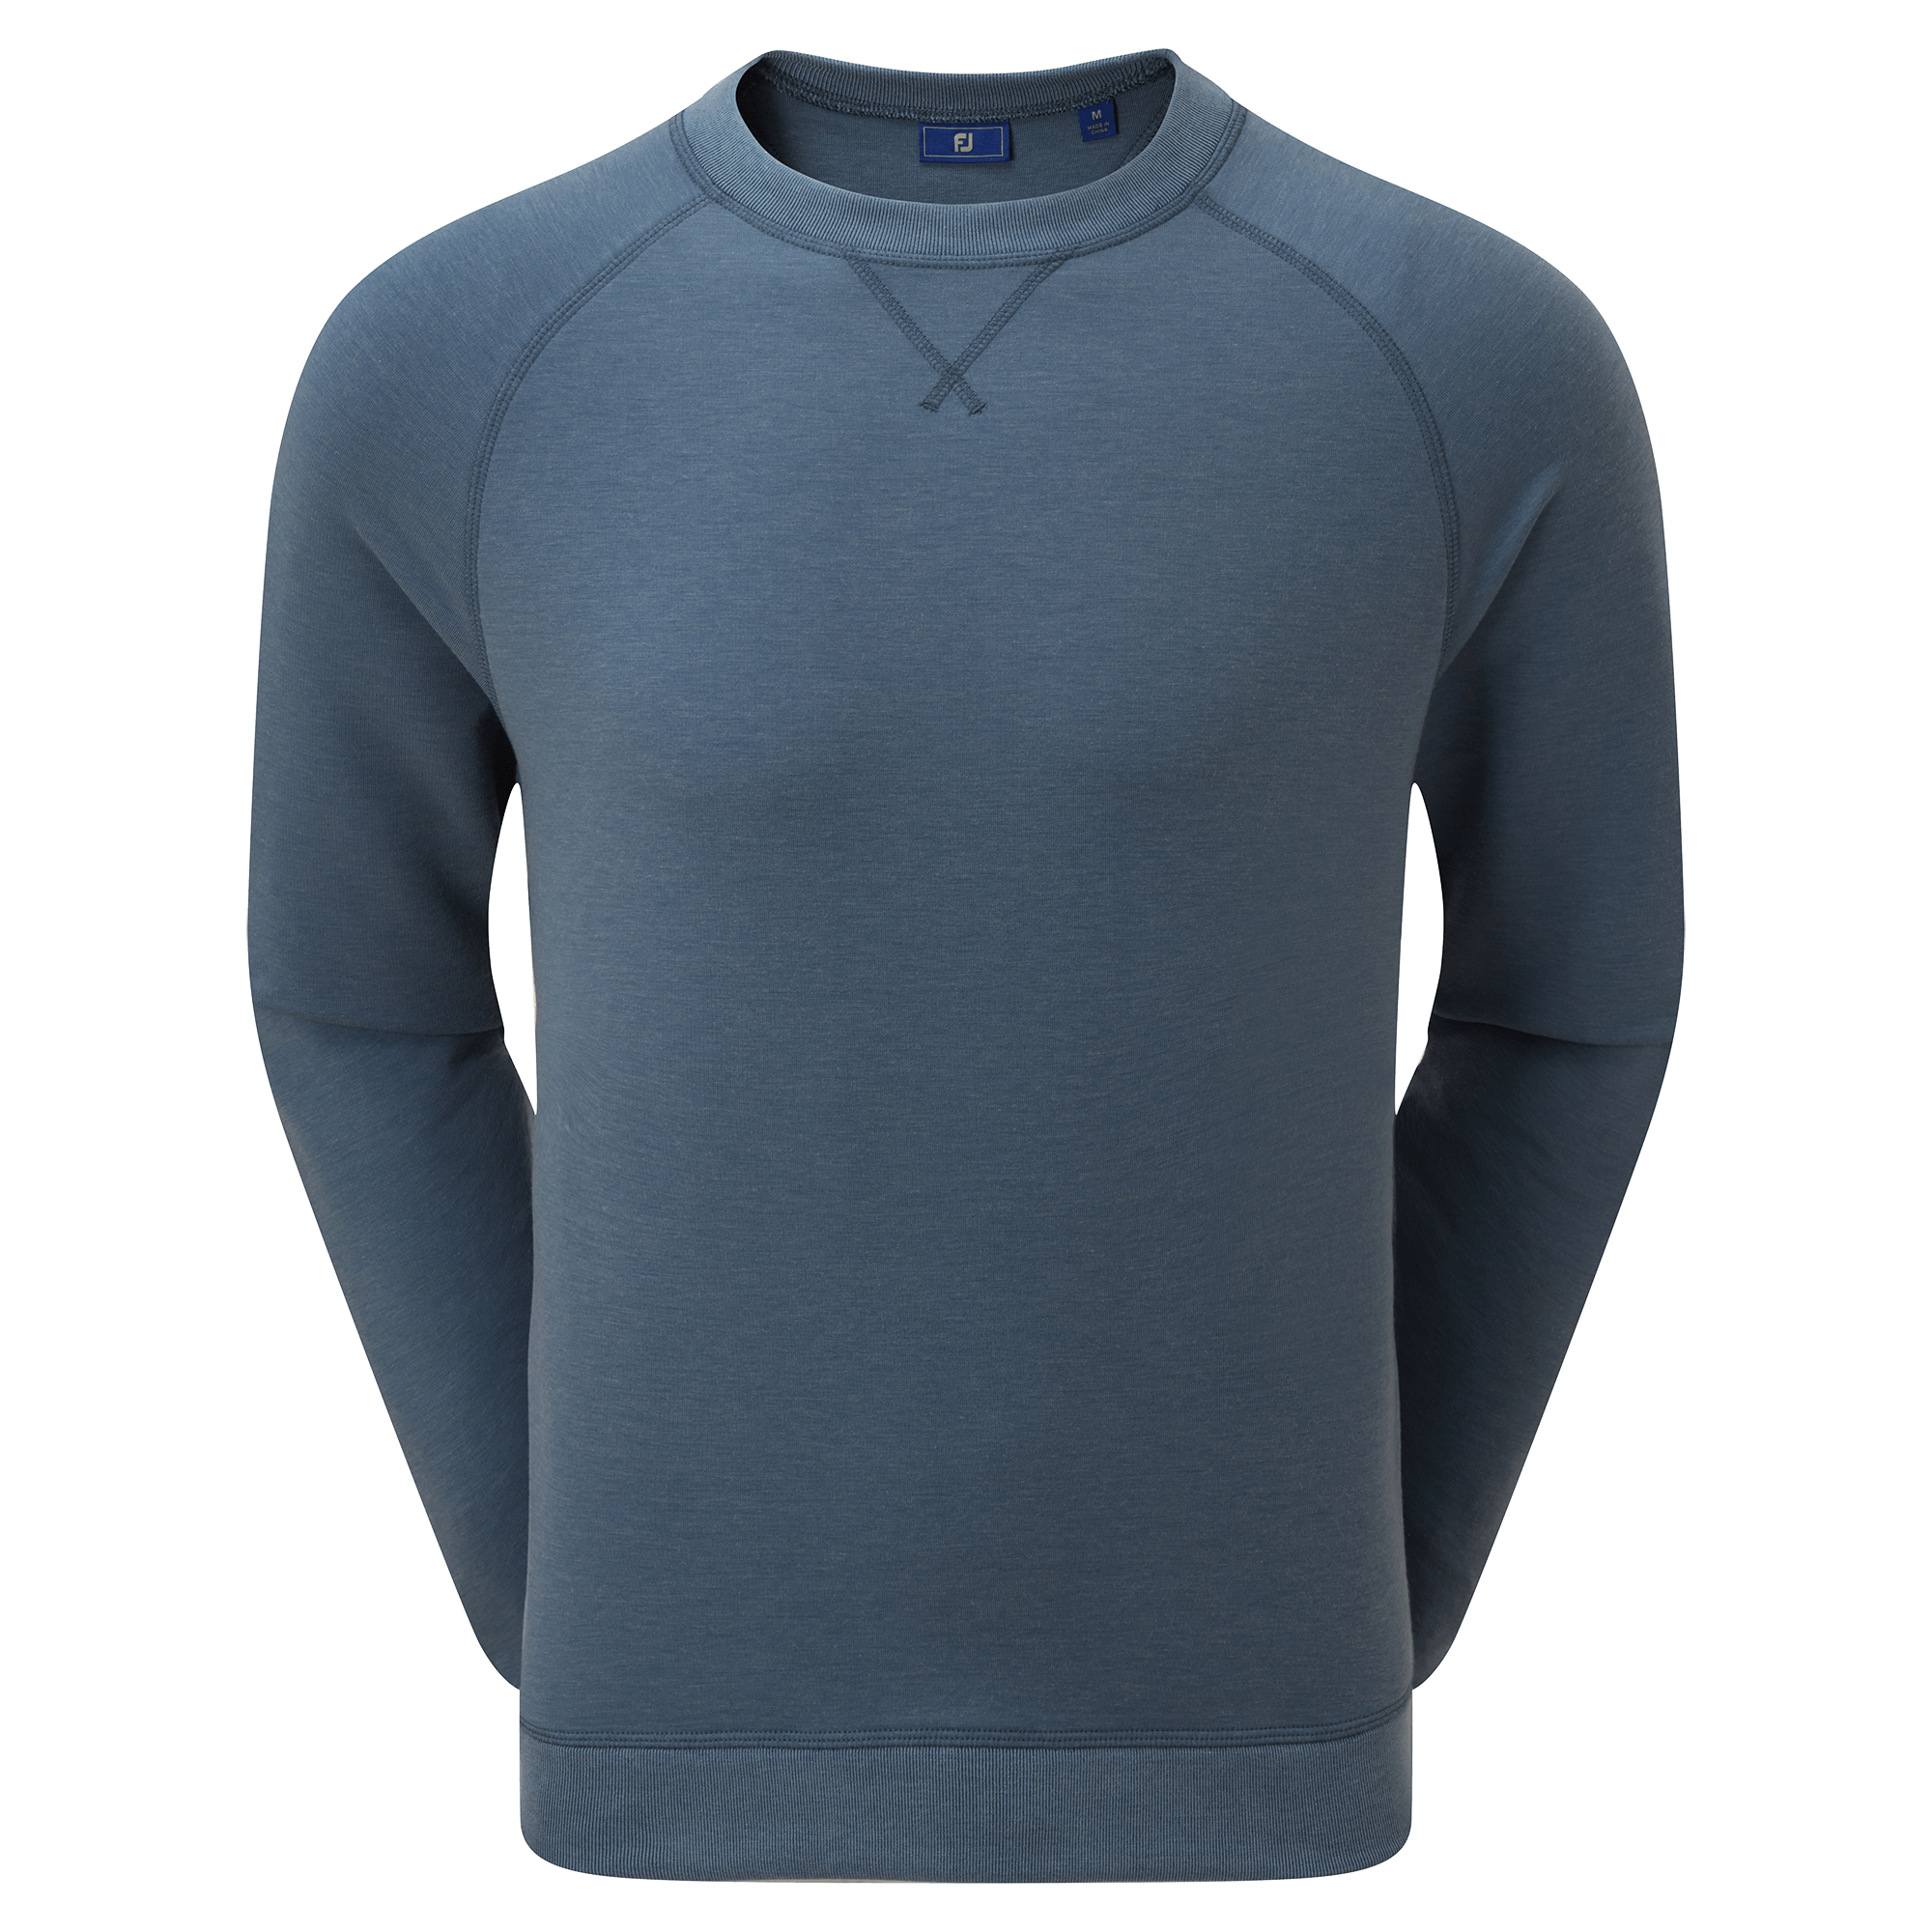 FootJoy Dri-Release French Terry Crew Neck Sweater